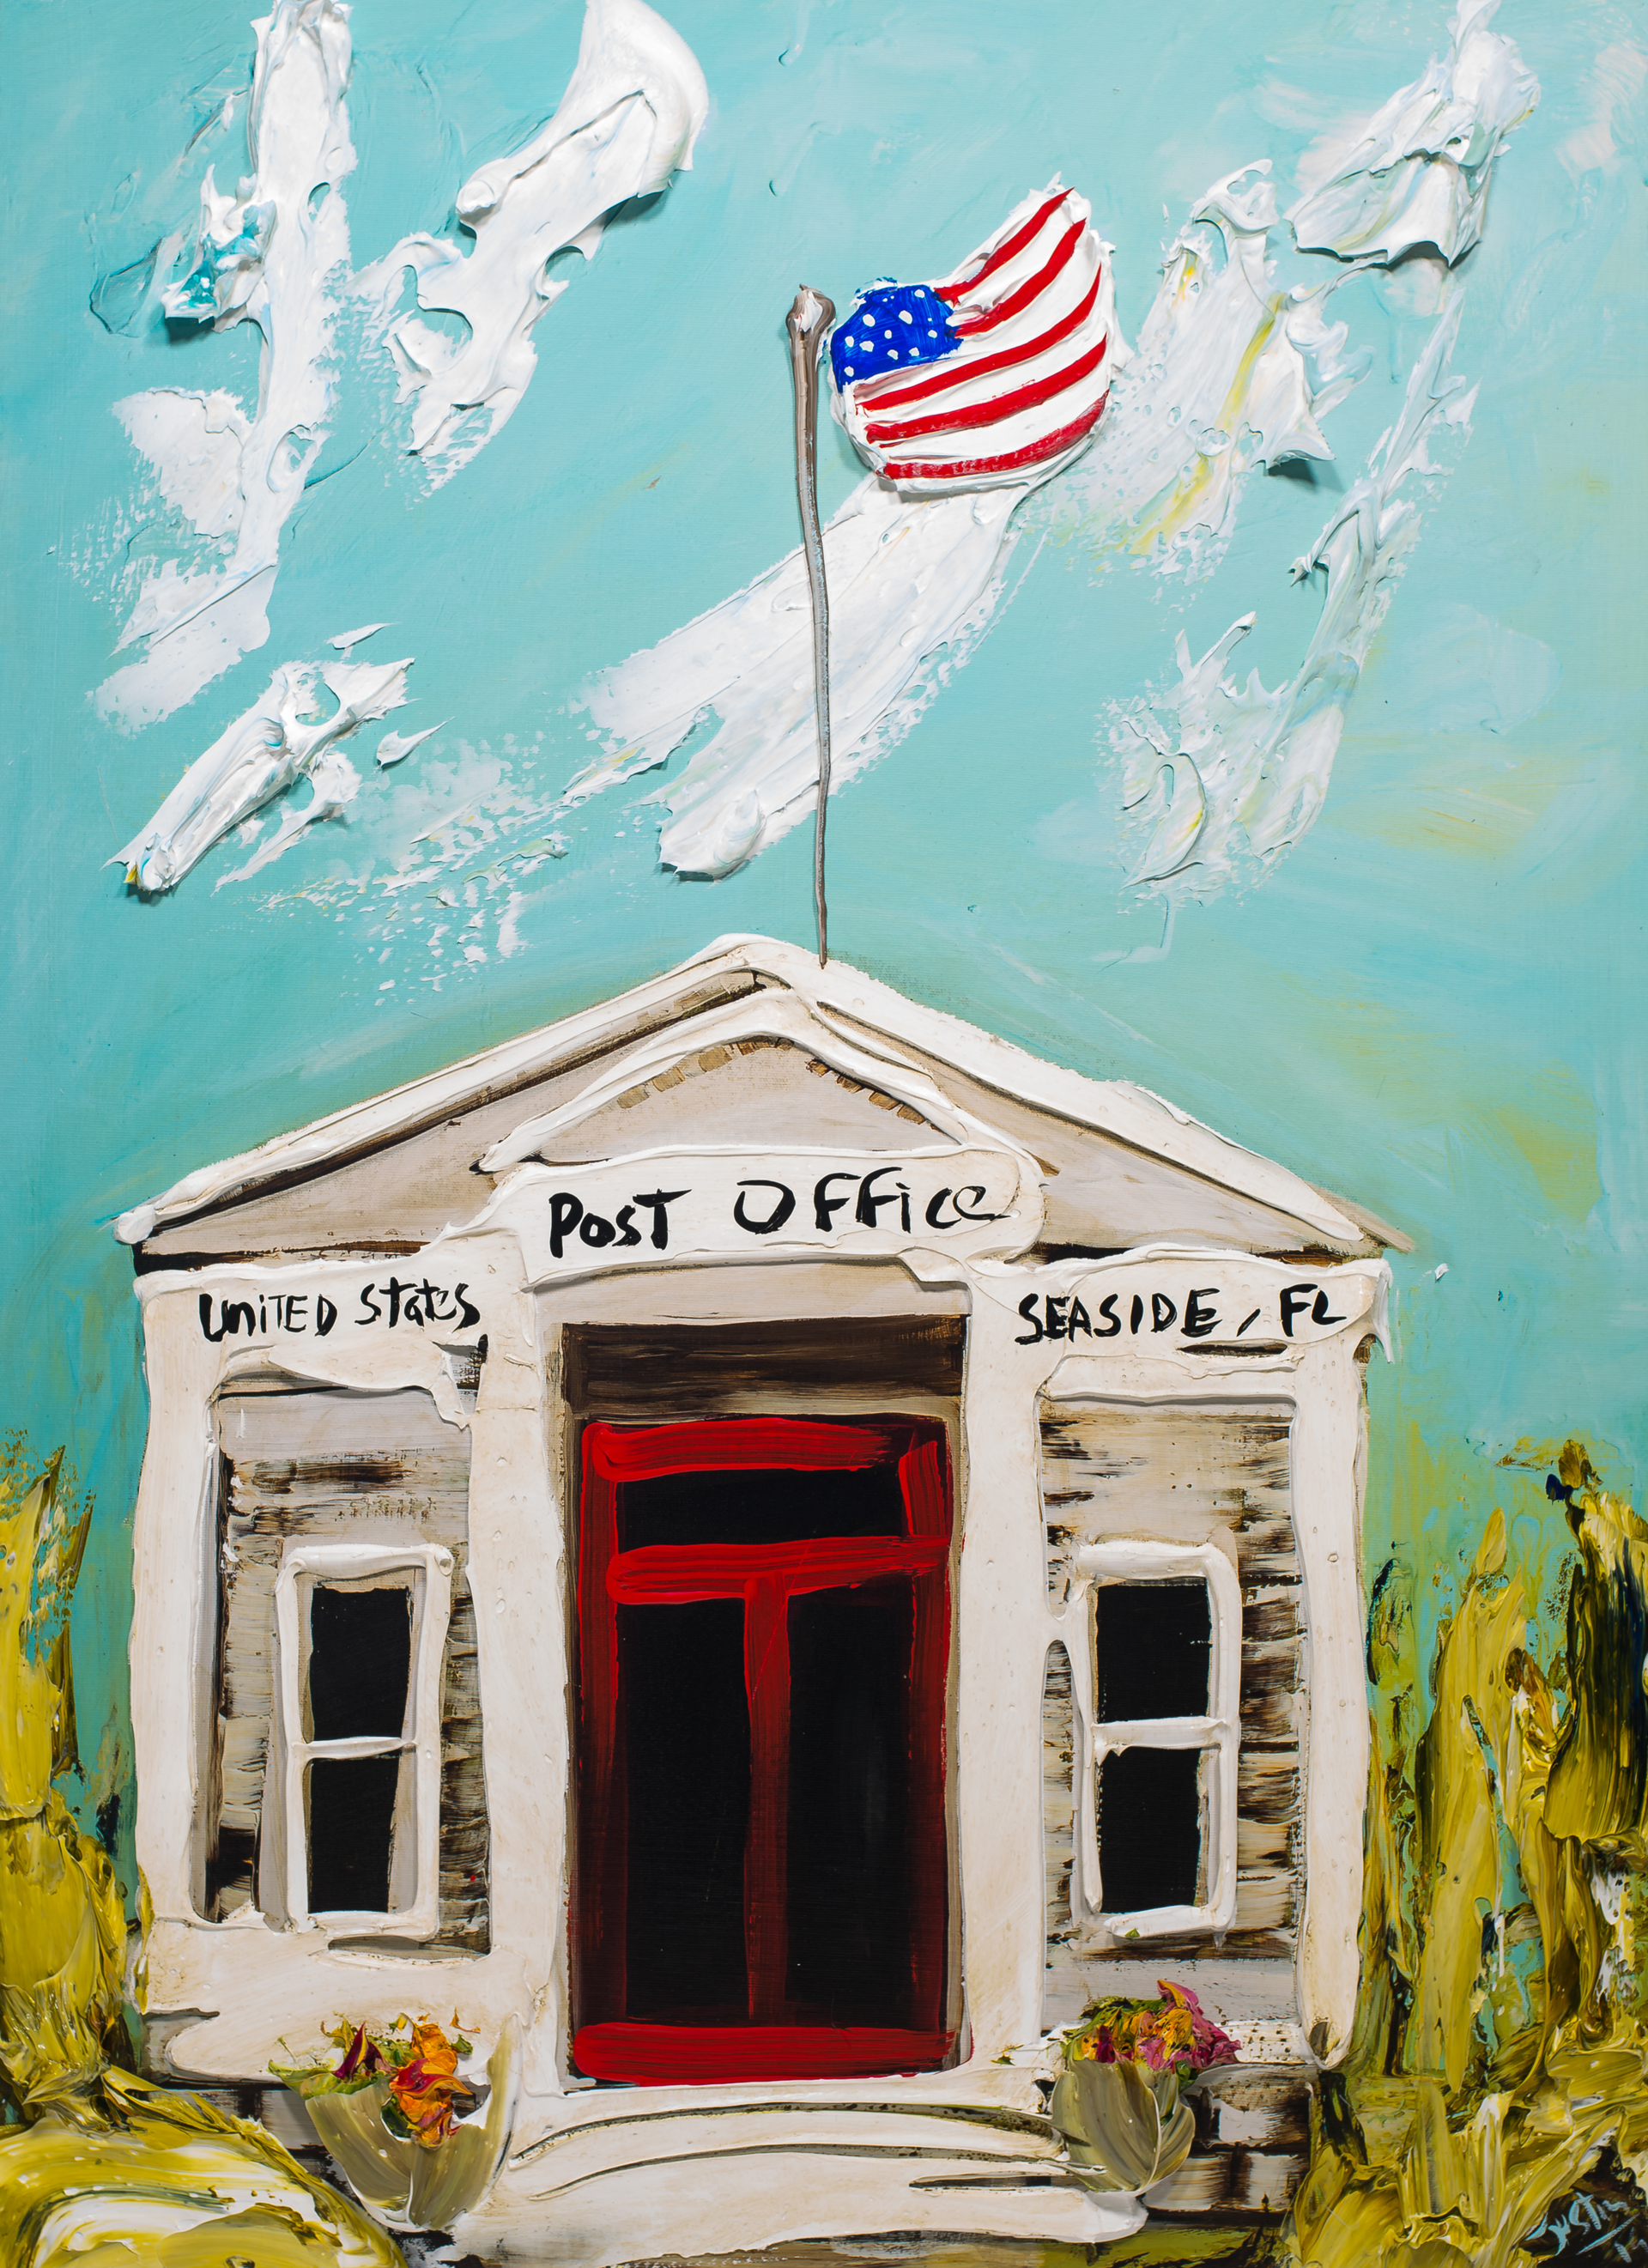 SEASIDE POST OFFICE HPAE 10/50 by JUSTIN GAFFREY